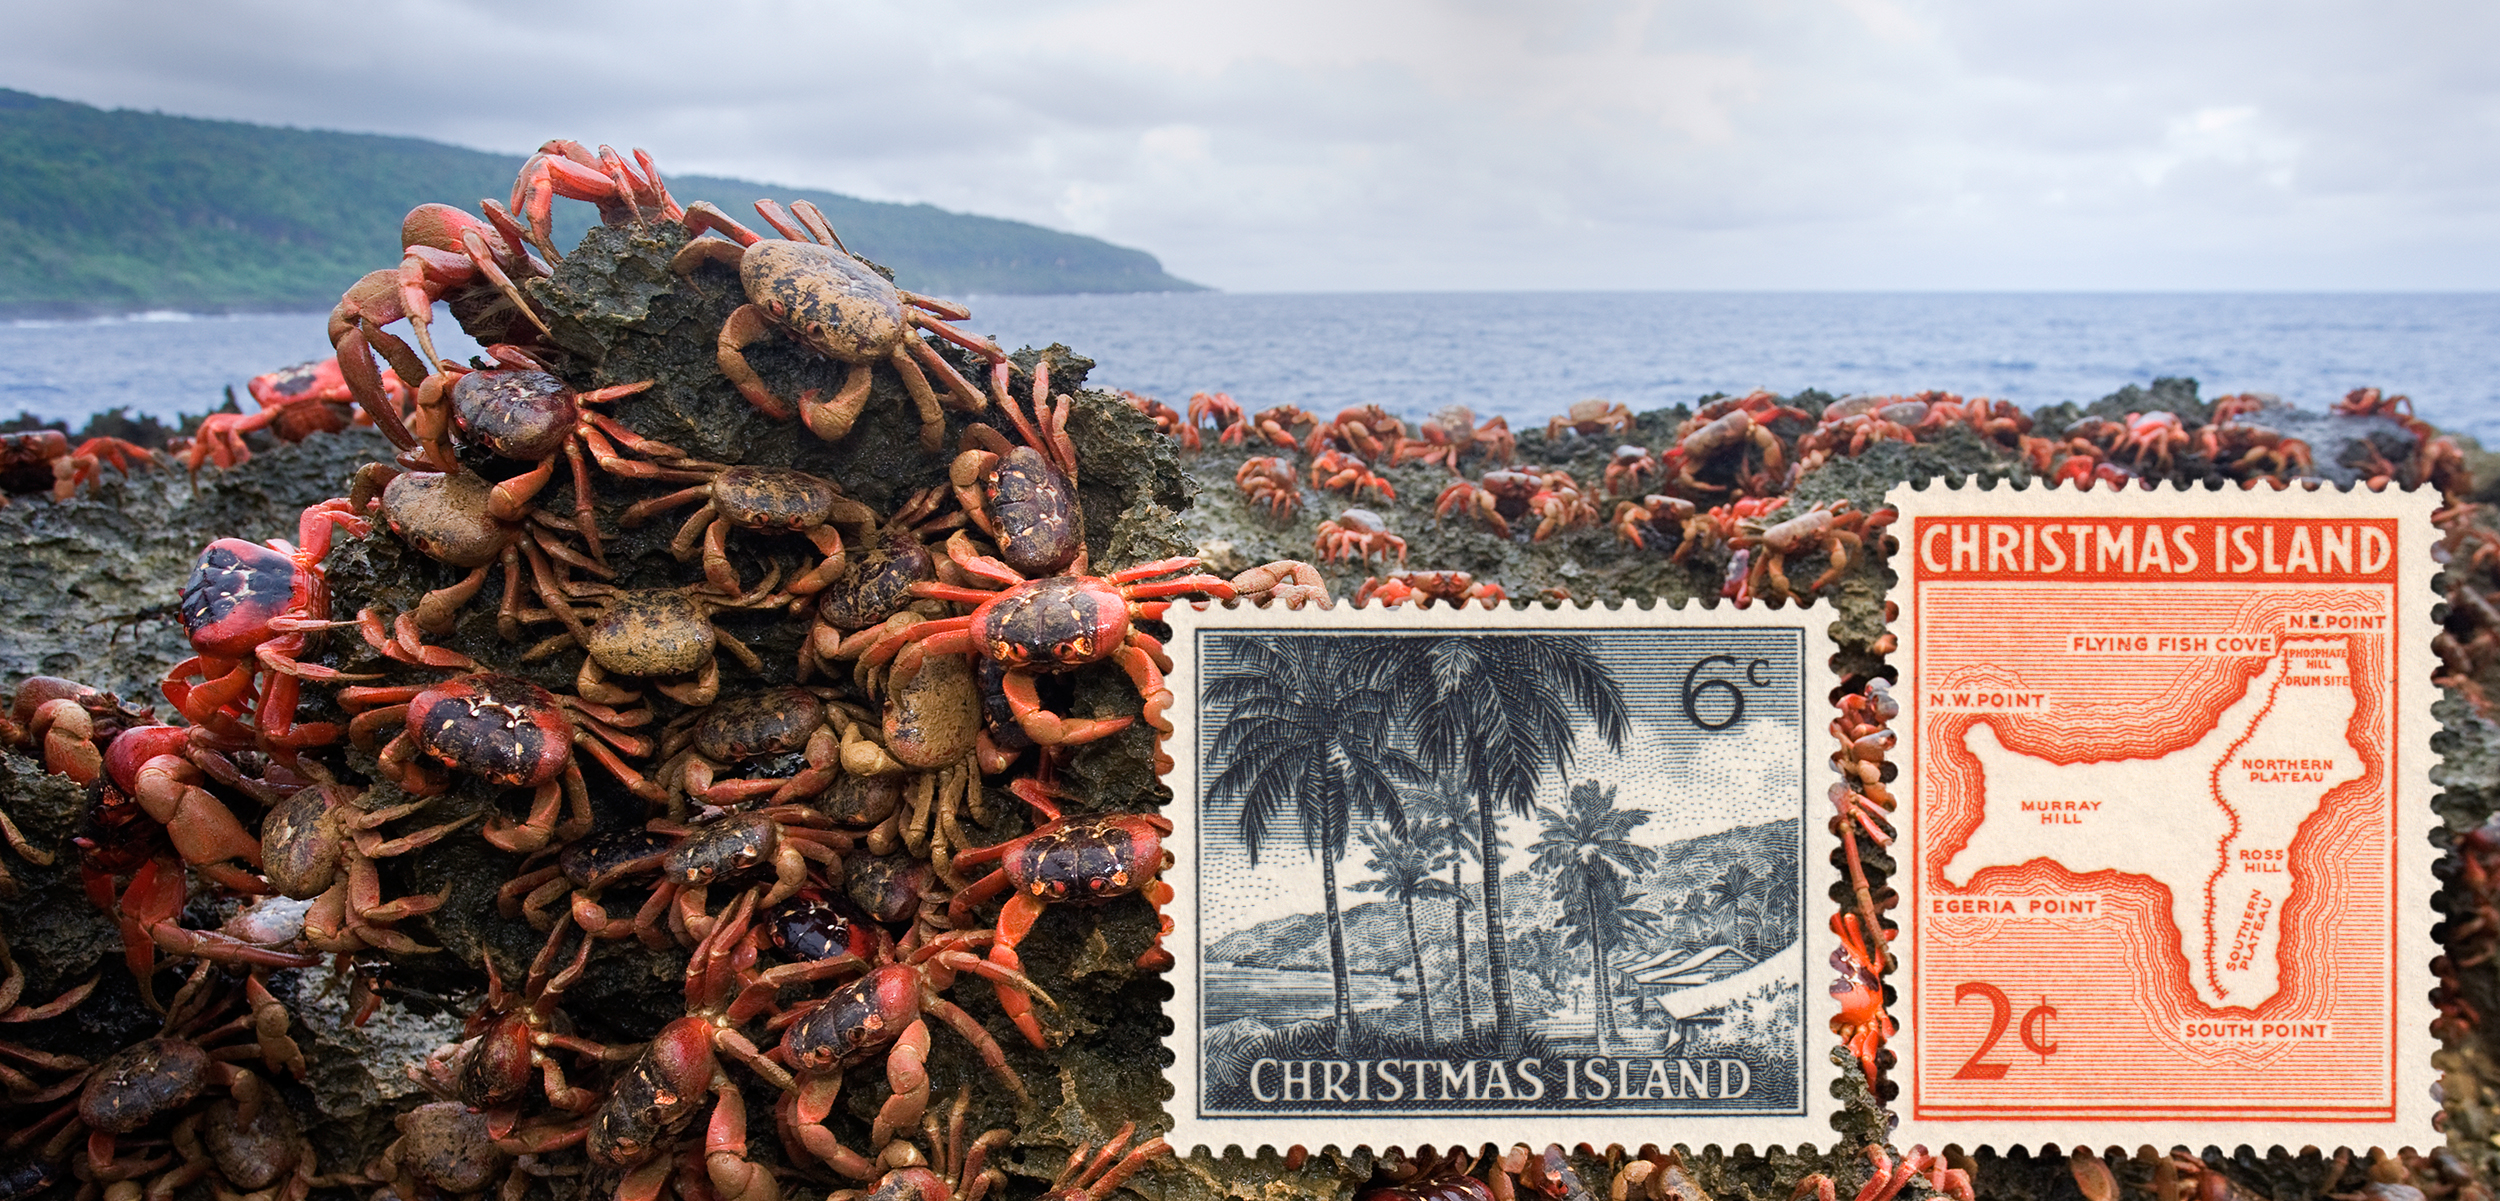 The biodiversity, unique culture, and colorful history of Australia’s Christmas Island is reflected in postage stamps. Background photo by Stephen Belcher/Minden Pictures/Corbis